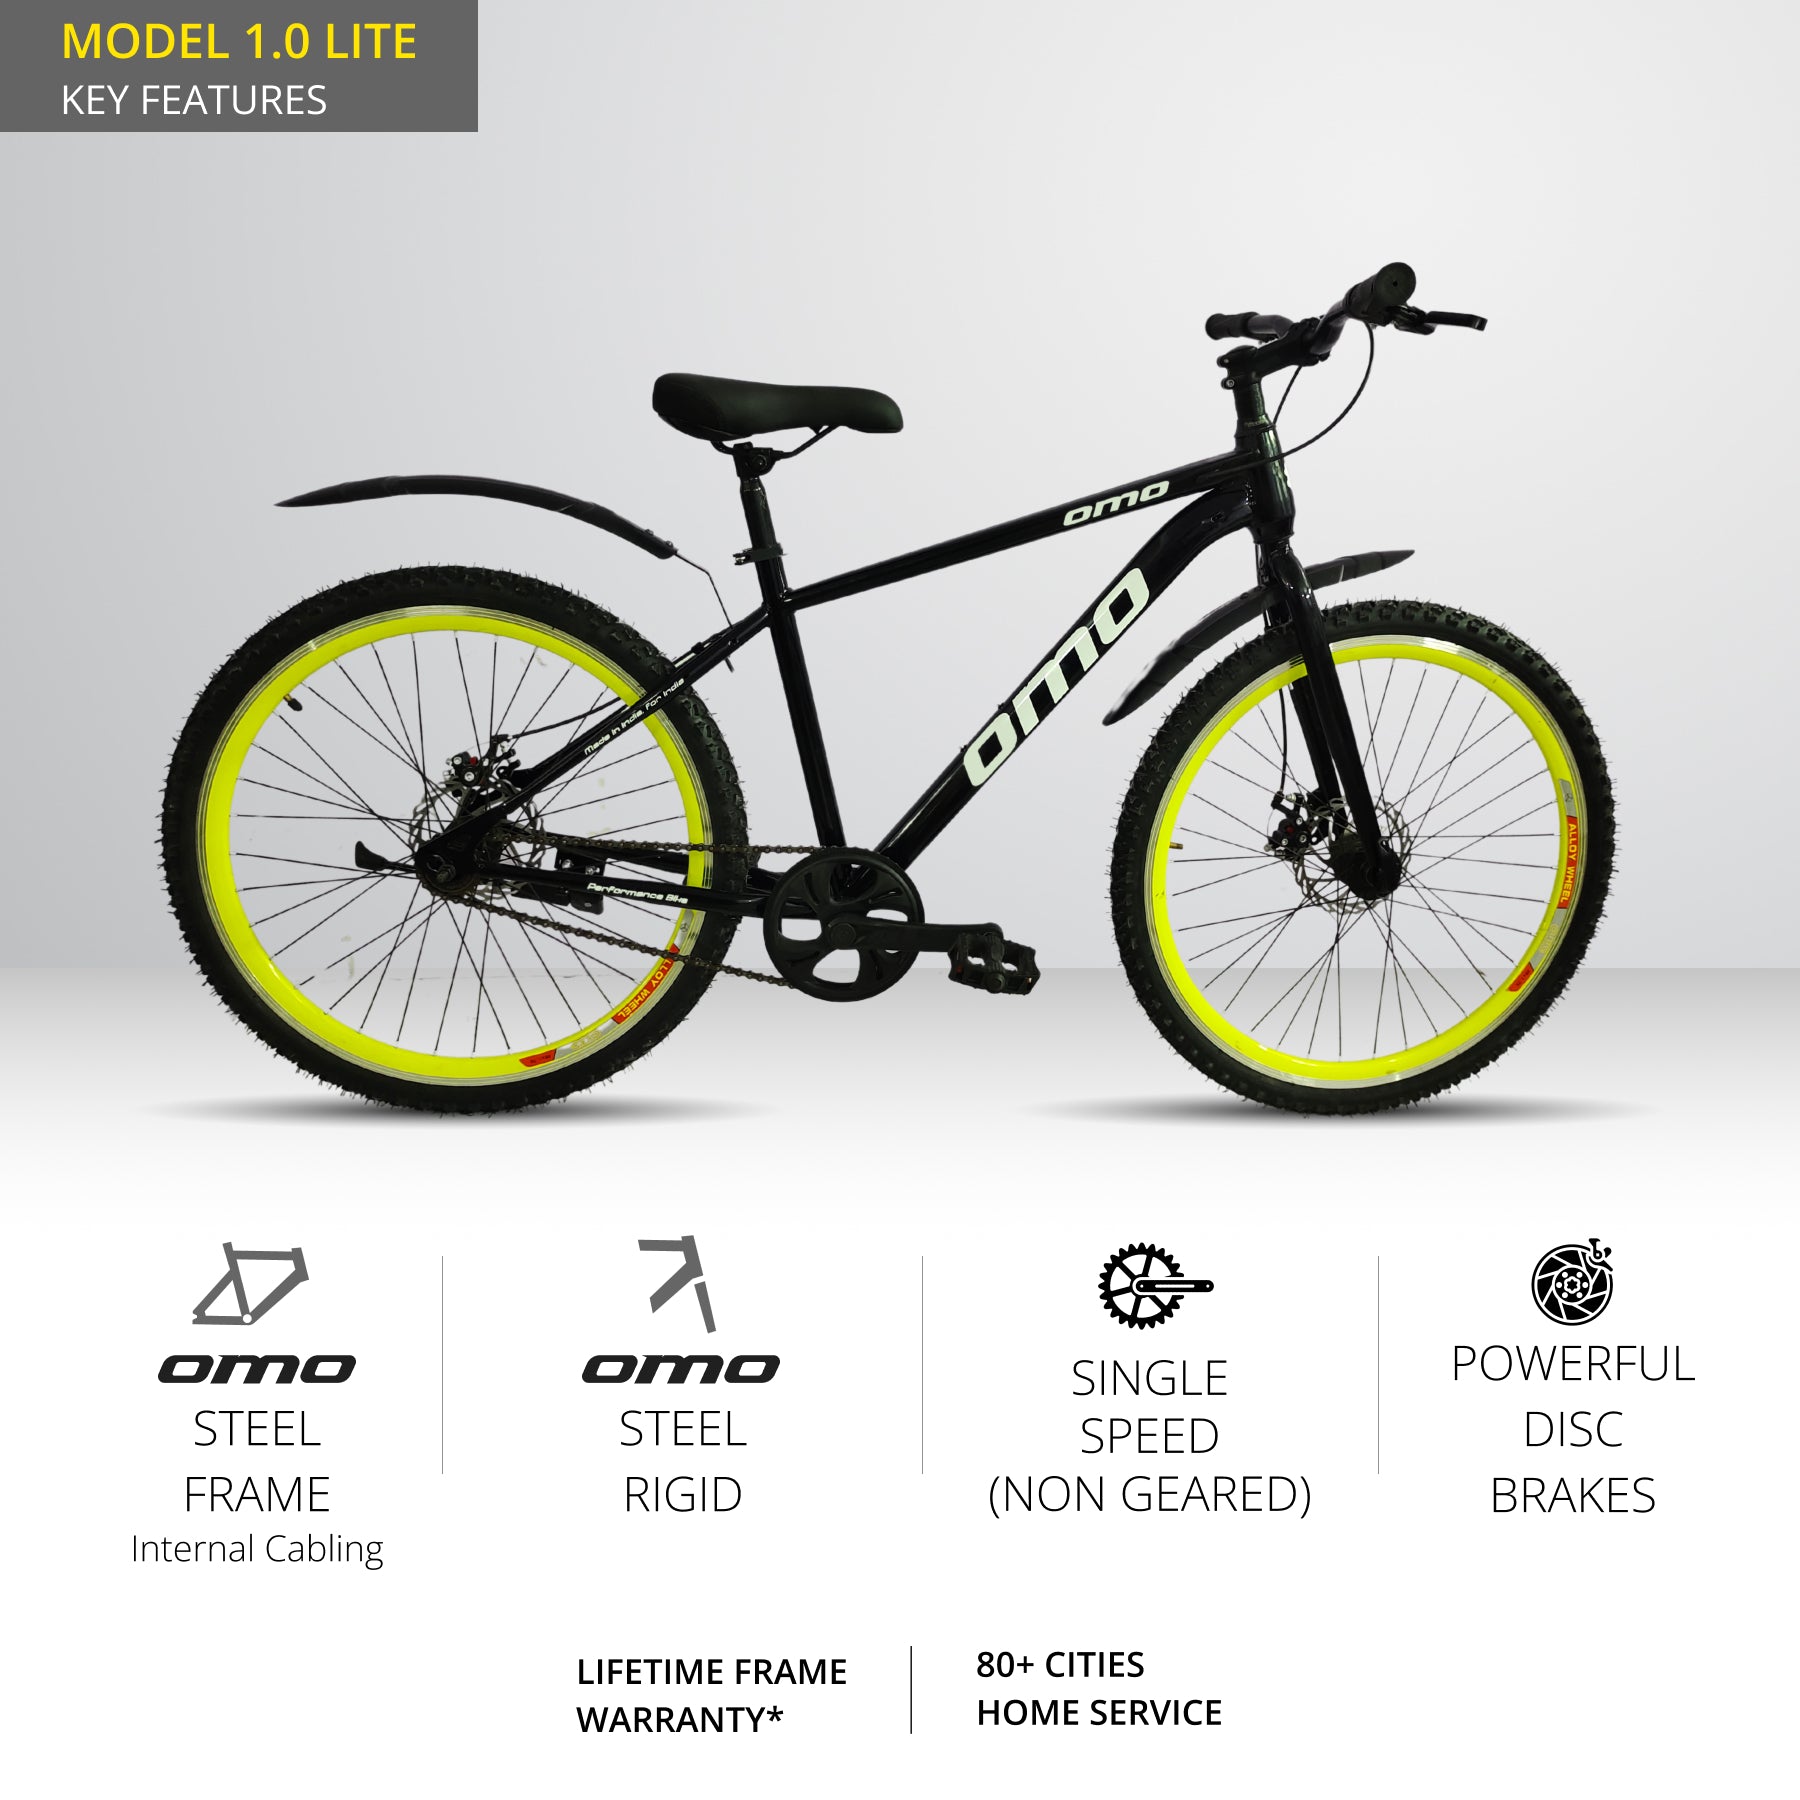 Top-rated affordable men's and adult hybrid bike from Omobikes, Model 1.0 in a stylish green and black color